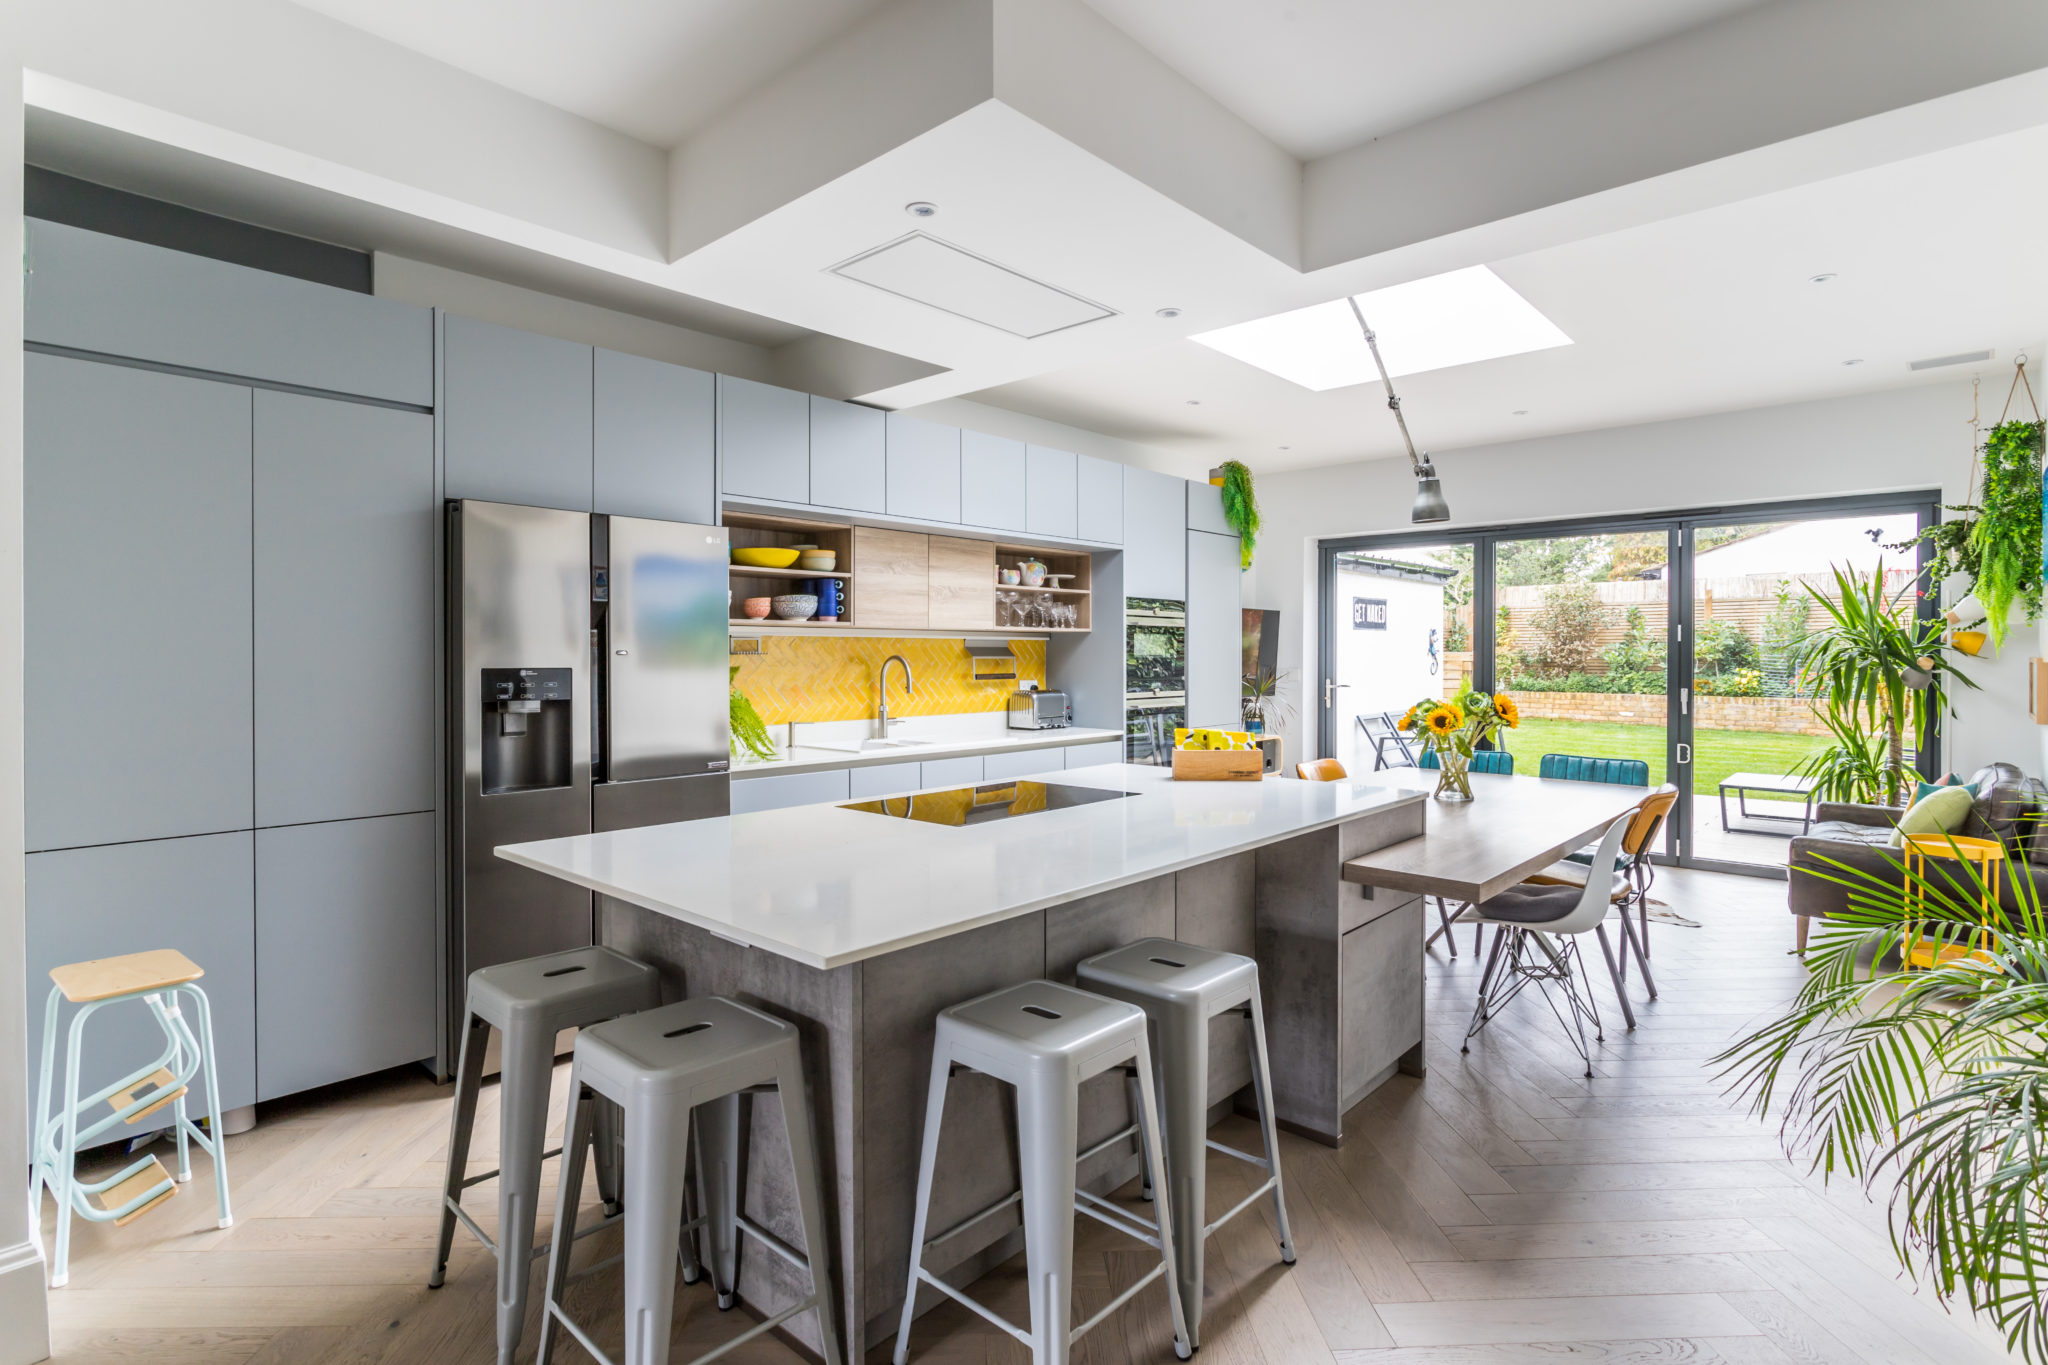 image shows a bright and spacious family kitchen with yellow details and a kitchen island 